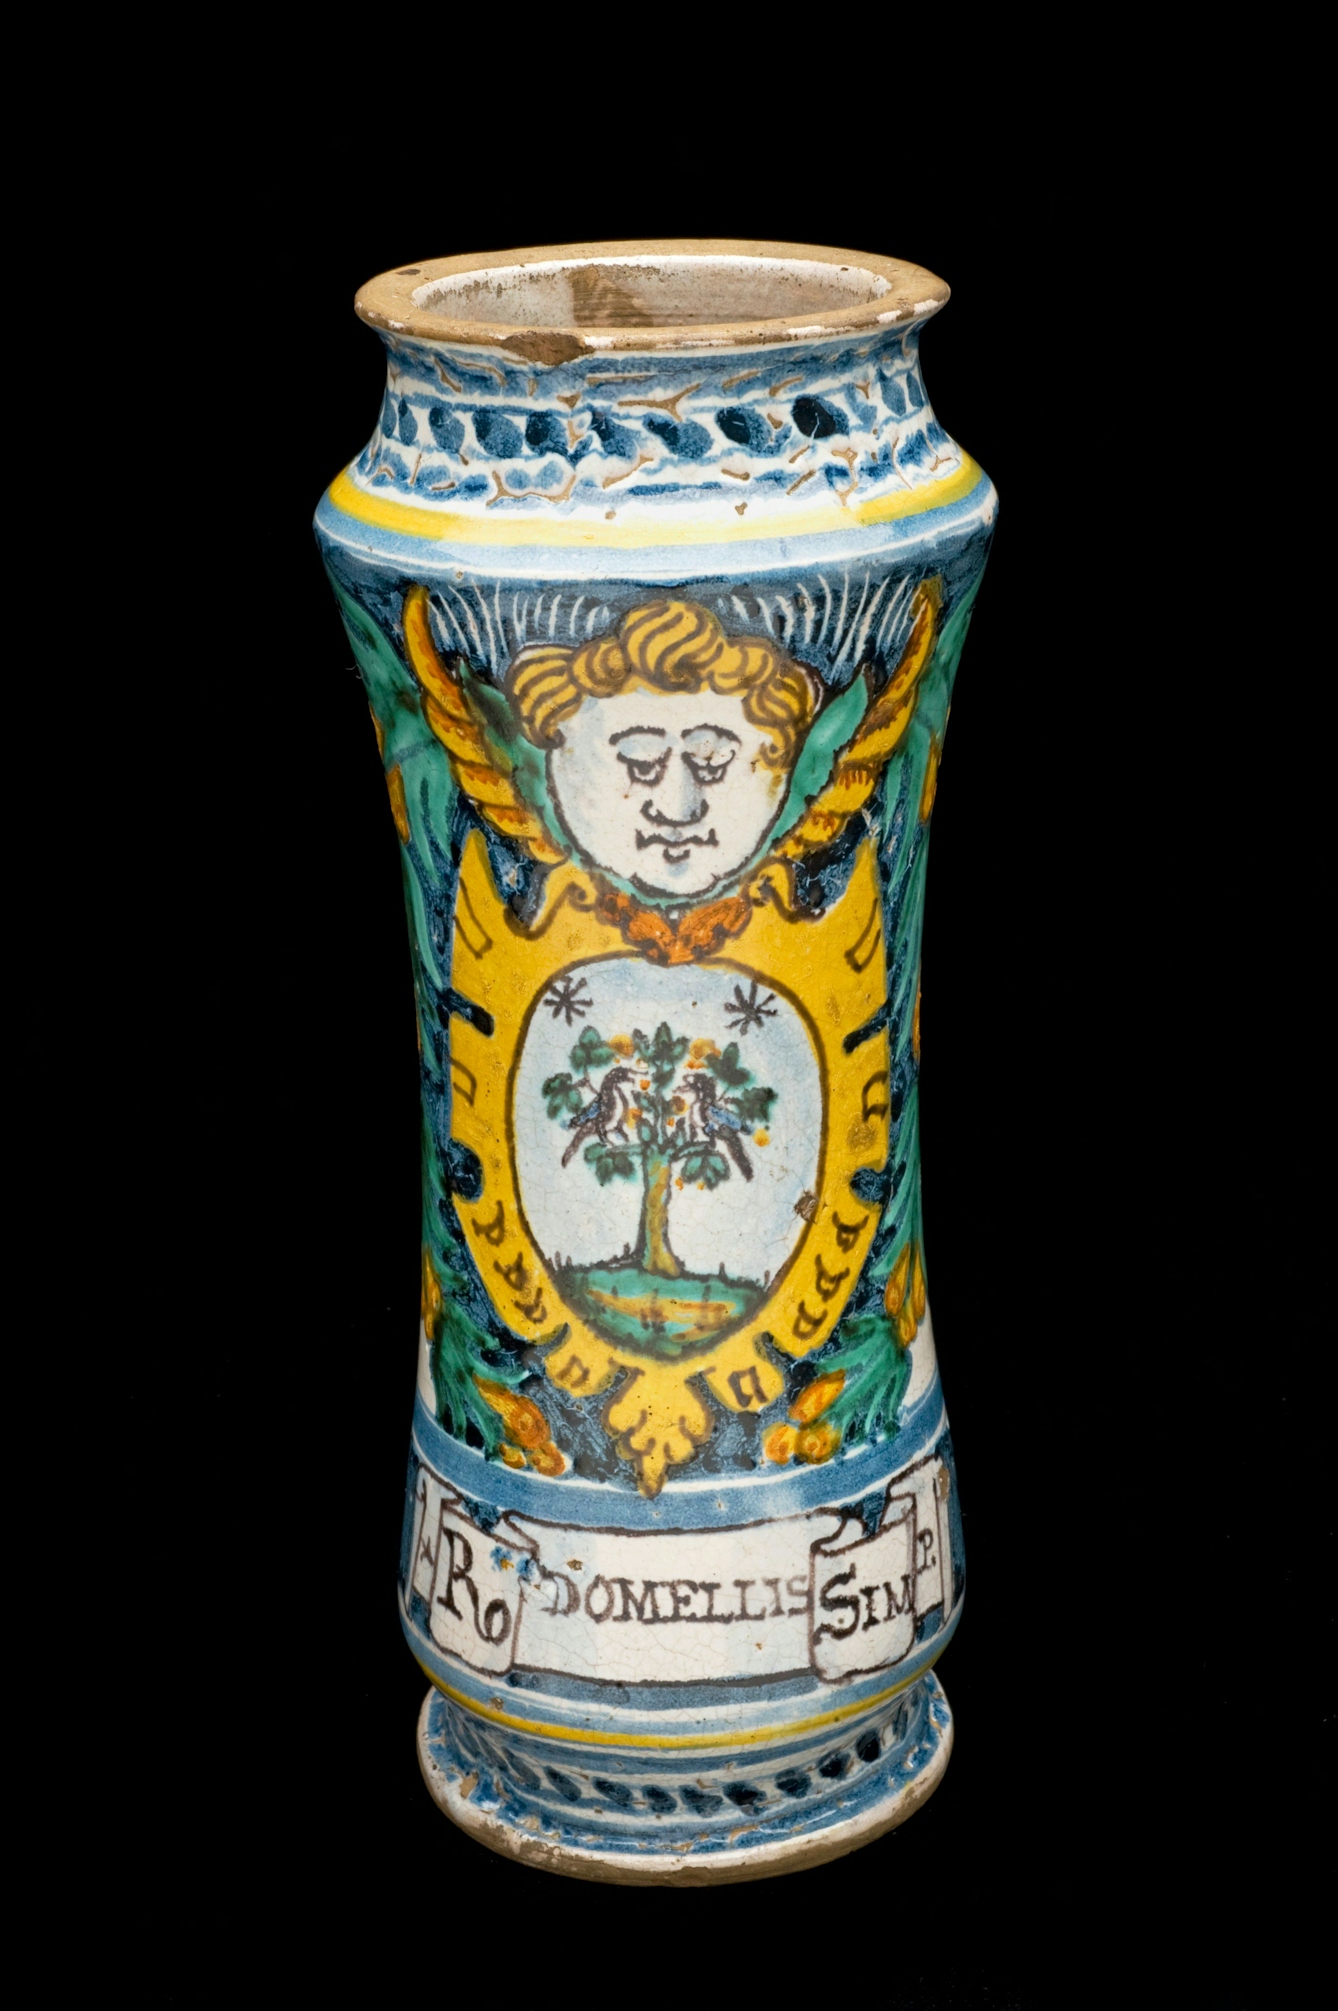 An 18th-century ceramic alberlello drug jar made in Italy. The tall narrow vase-like jar has blue, yellow and green glaze on a white background and depicts a blond cherub face with wings on either side. Beneath this in a yello crest is a picture of two birds in a tree. Bellow this is a scroll with the words "Rhodomel Simplex" (Latin for “Simple Honey of Roses).